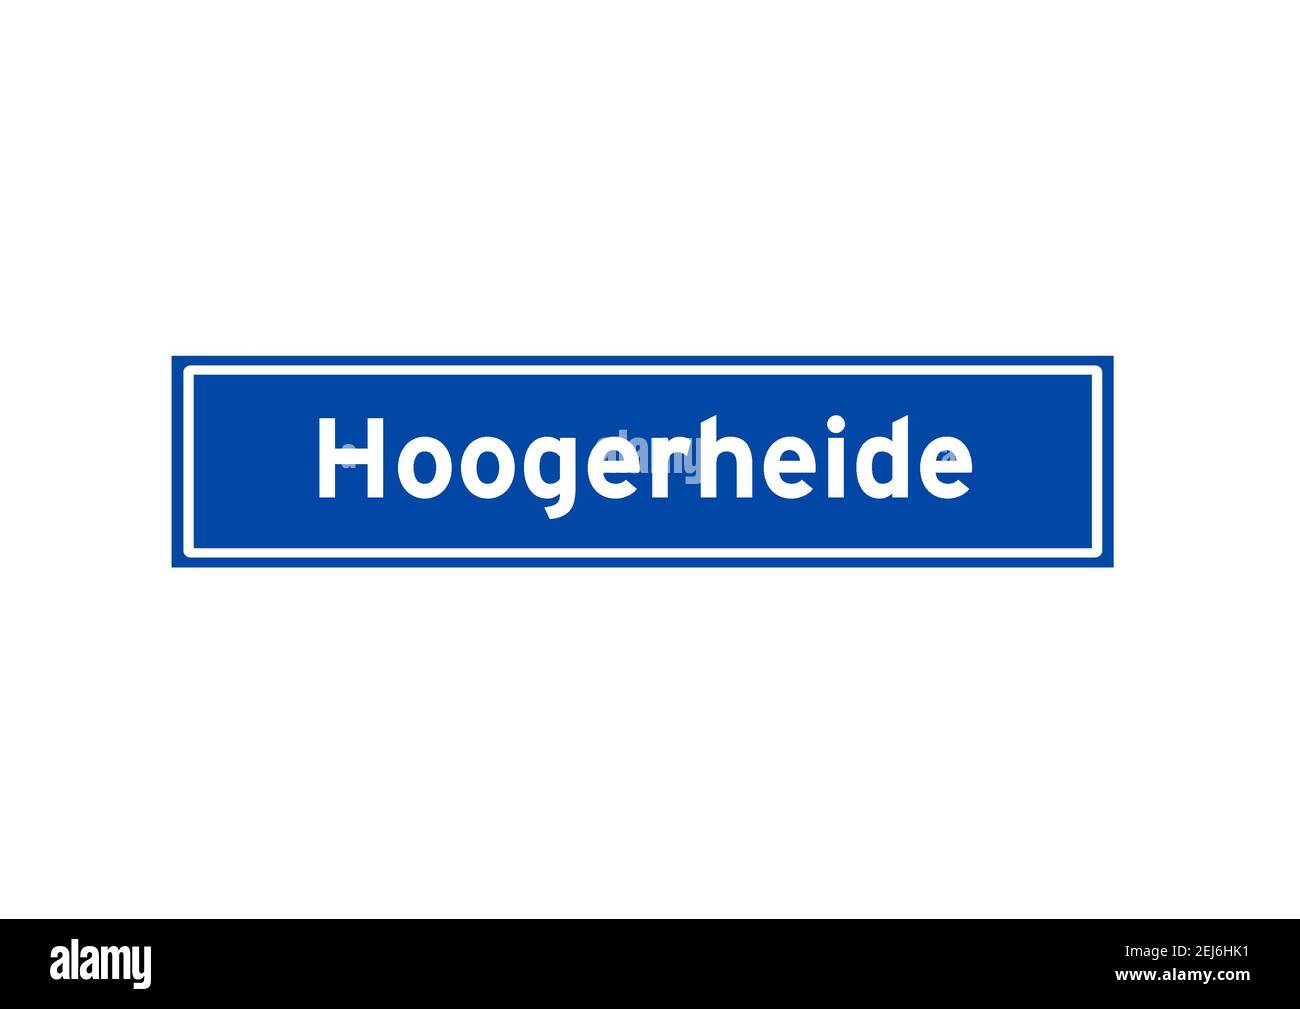 Hoogerheide isolated Dutch place name sign. City sign from the Netherlands. Stock Photo